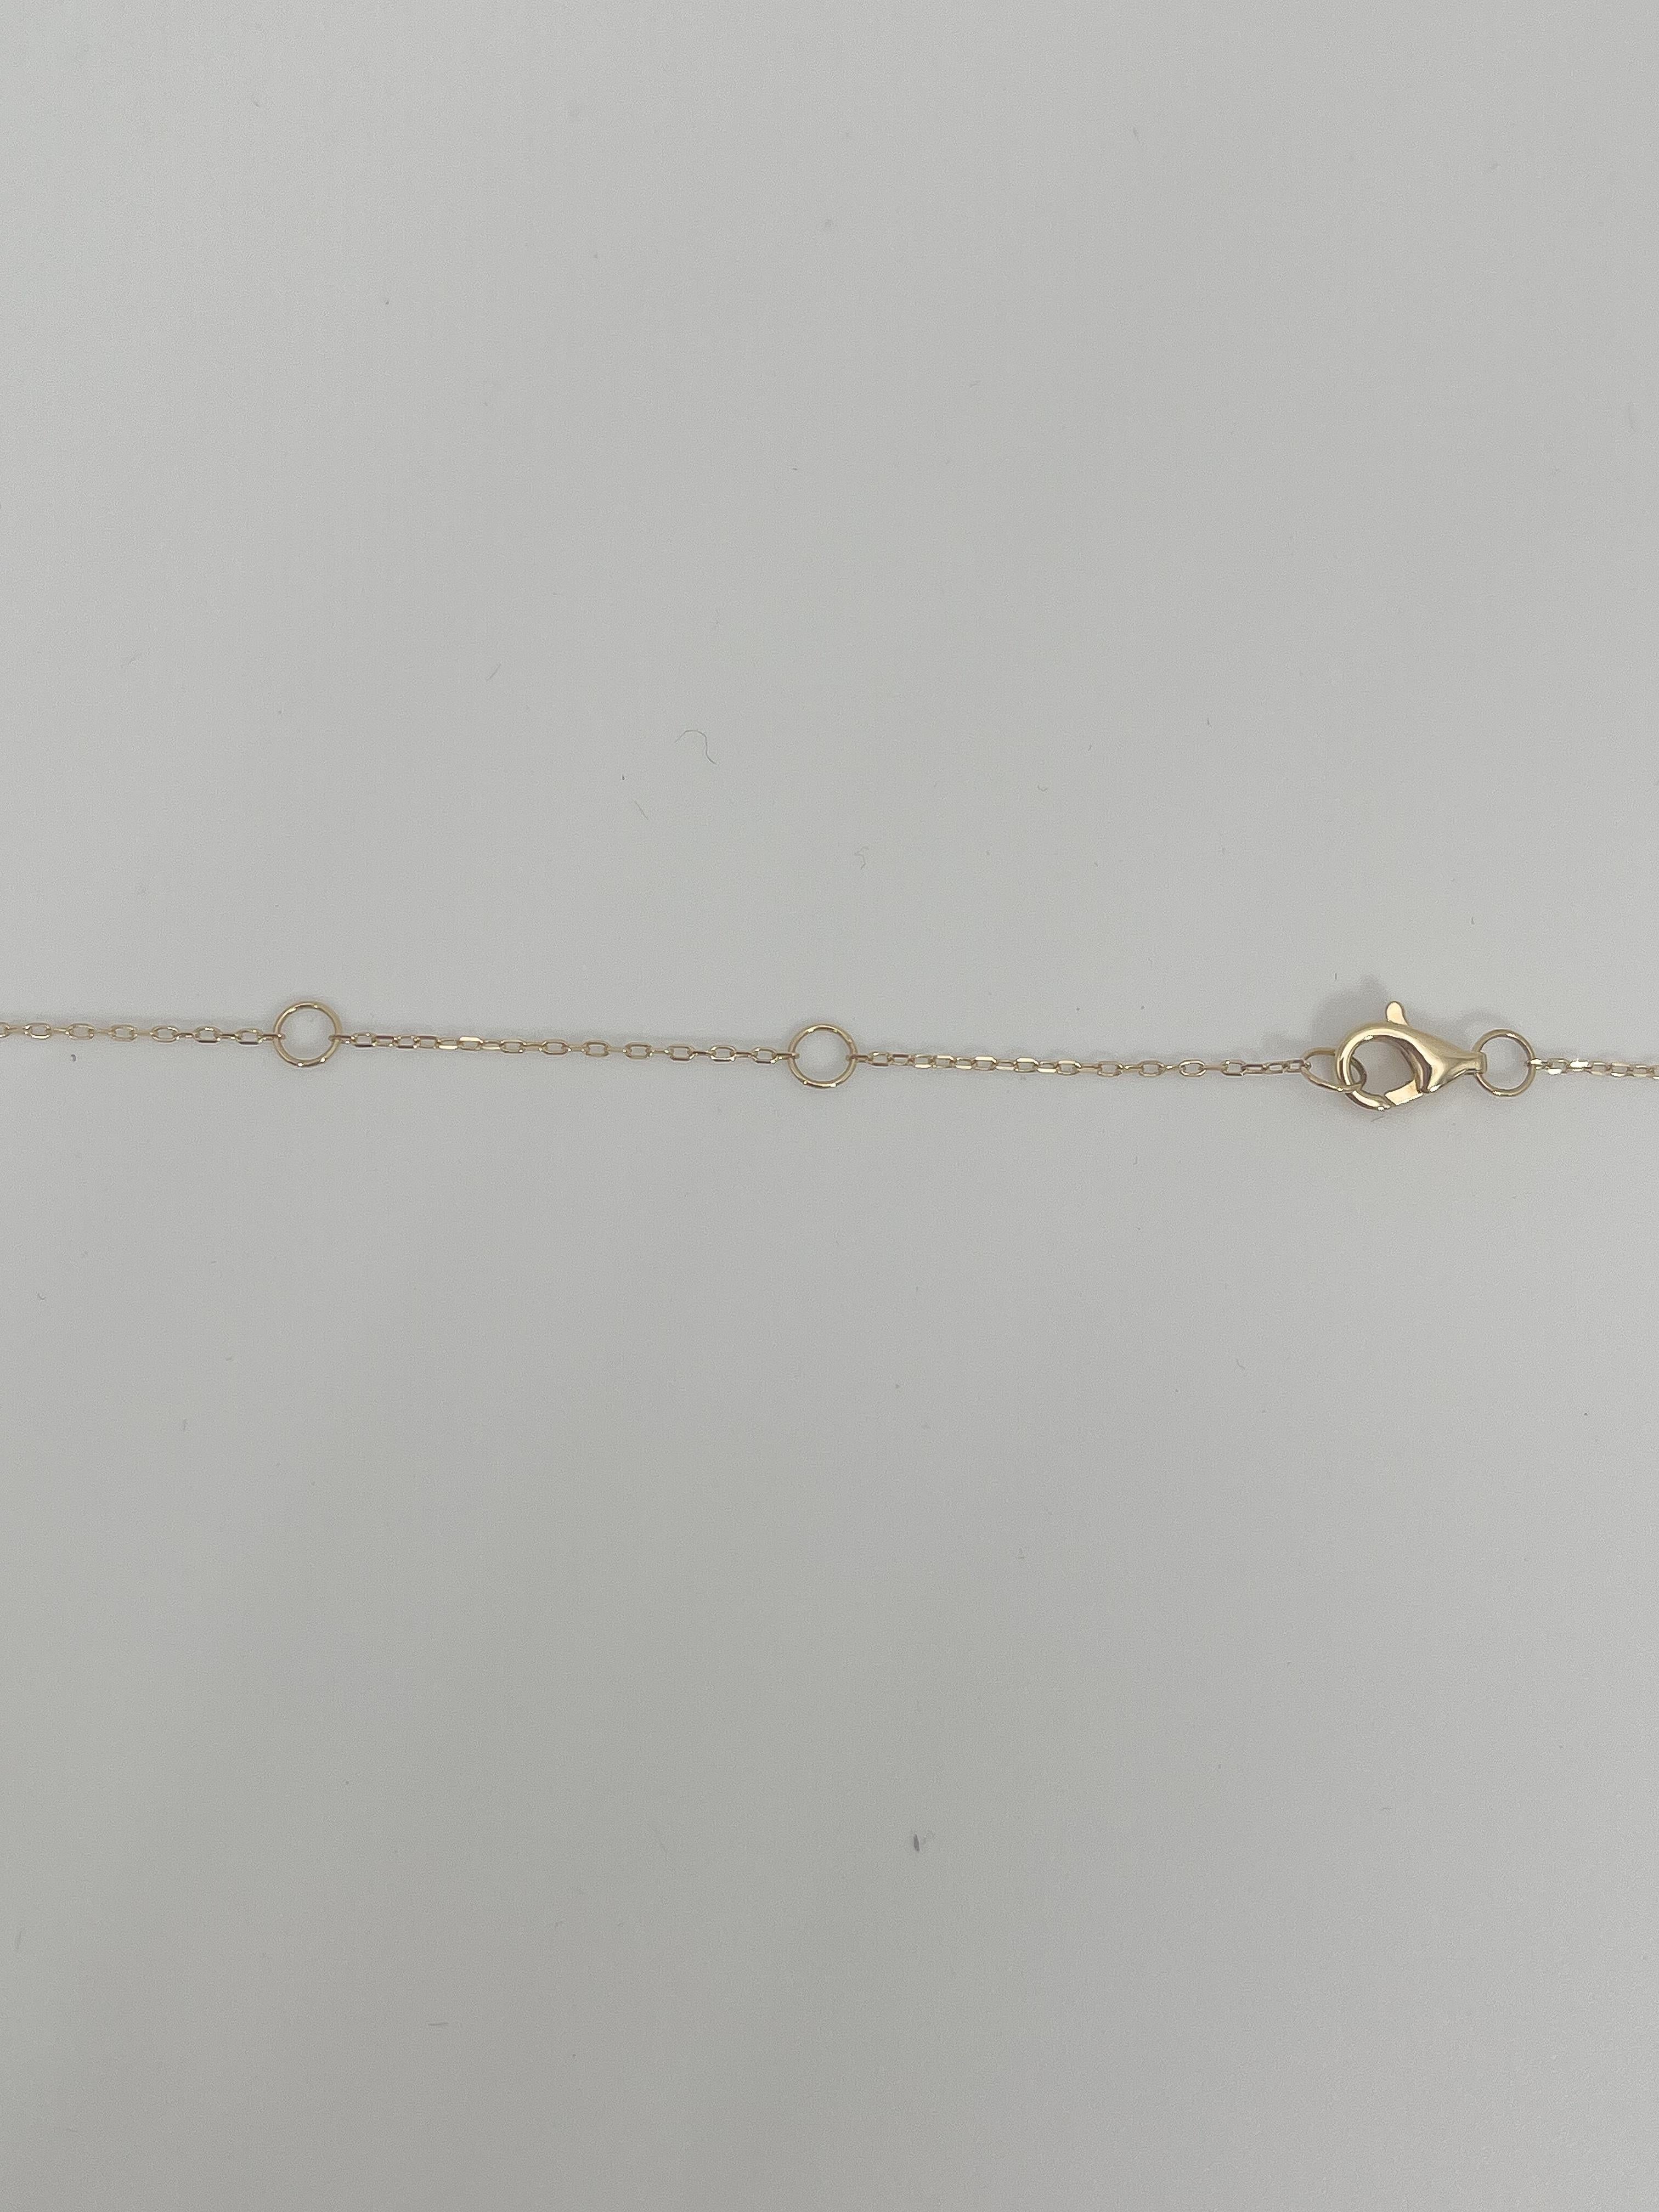 14k yellow gold .22 CTW diamond cross pendant necklace with diamond stations. The necklace measures to be 16'' with an extension at 17'' and 18'', the pendant measures 15mm x 10.5mm, the diamond stations have a diameter of 2.5mm, all diamonds in